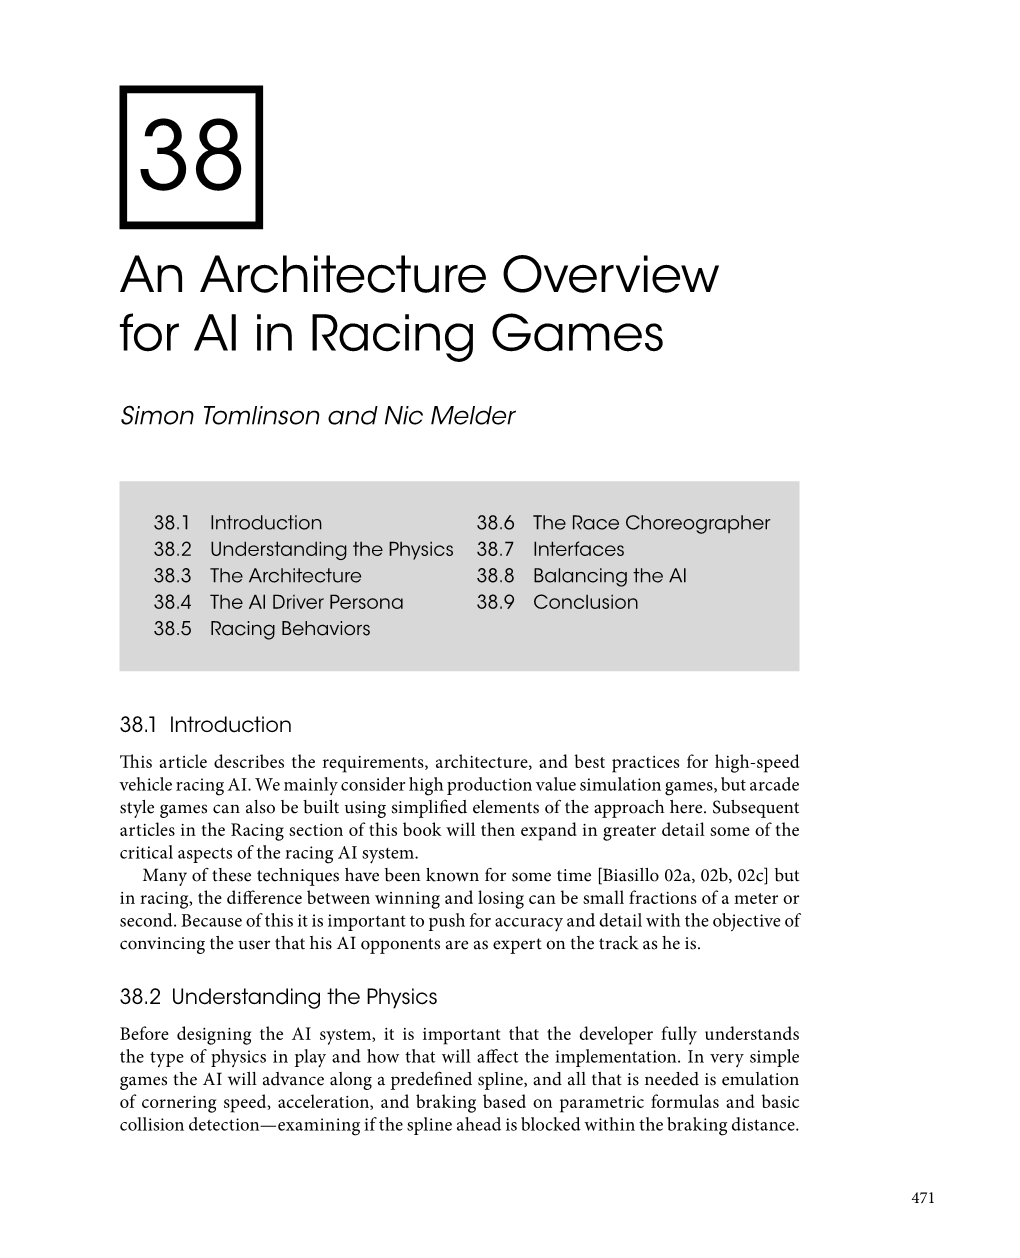 An Architecture Overview for AI in Racing Games